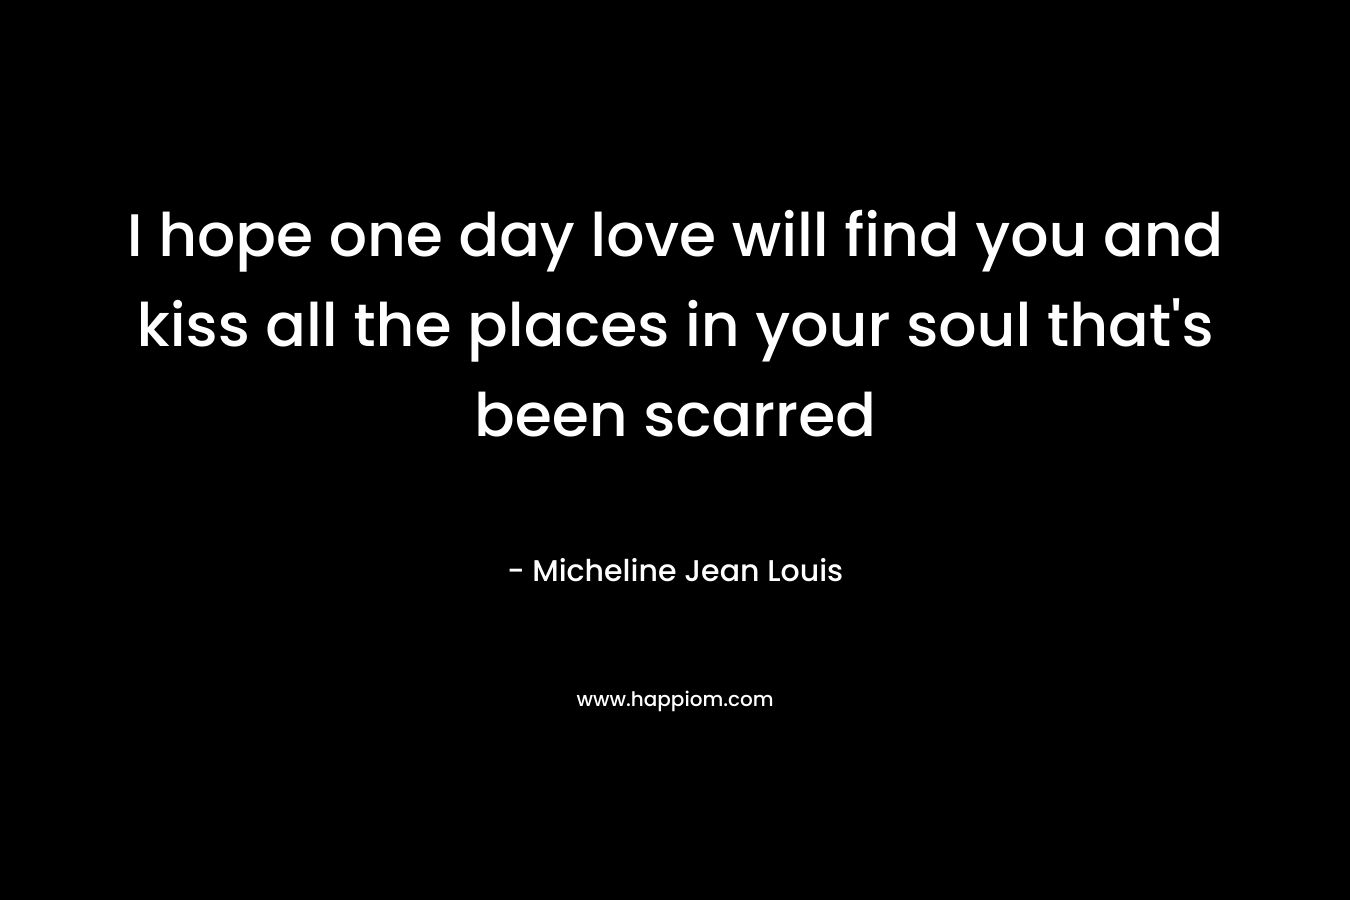 I hope one day love will find you and kiss all the places in your soul that's been scarred